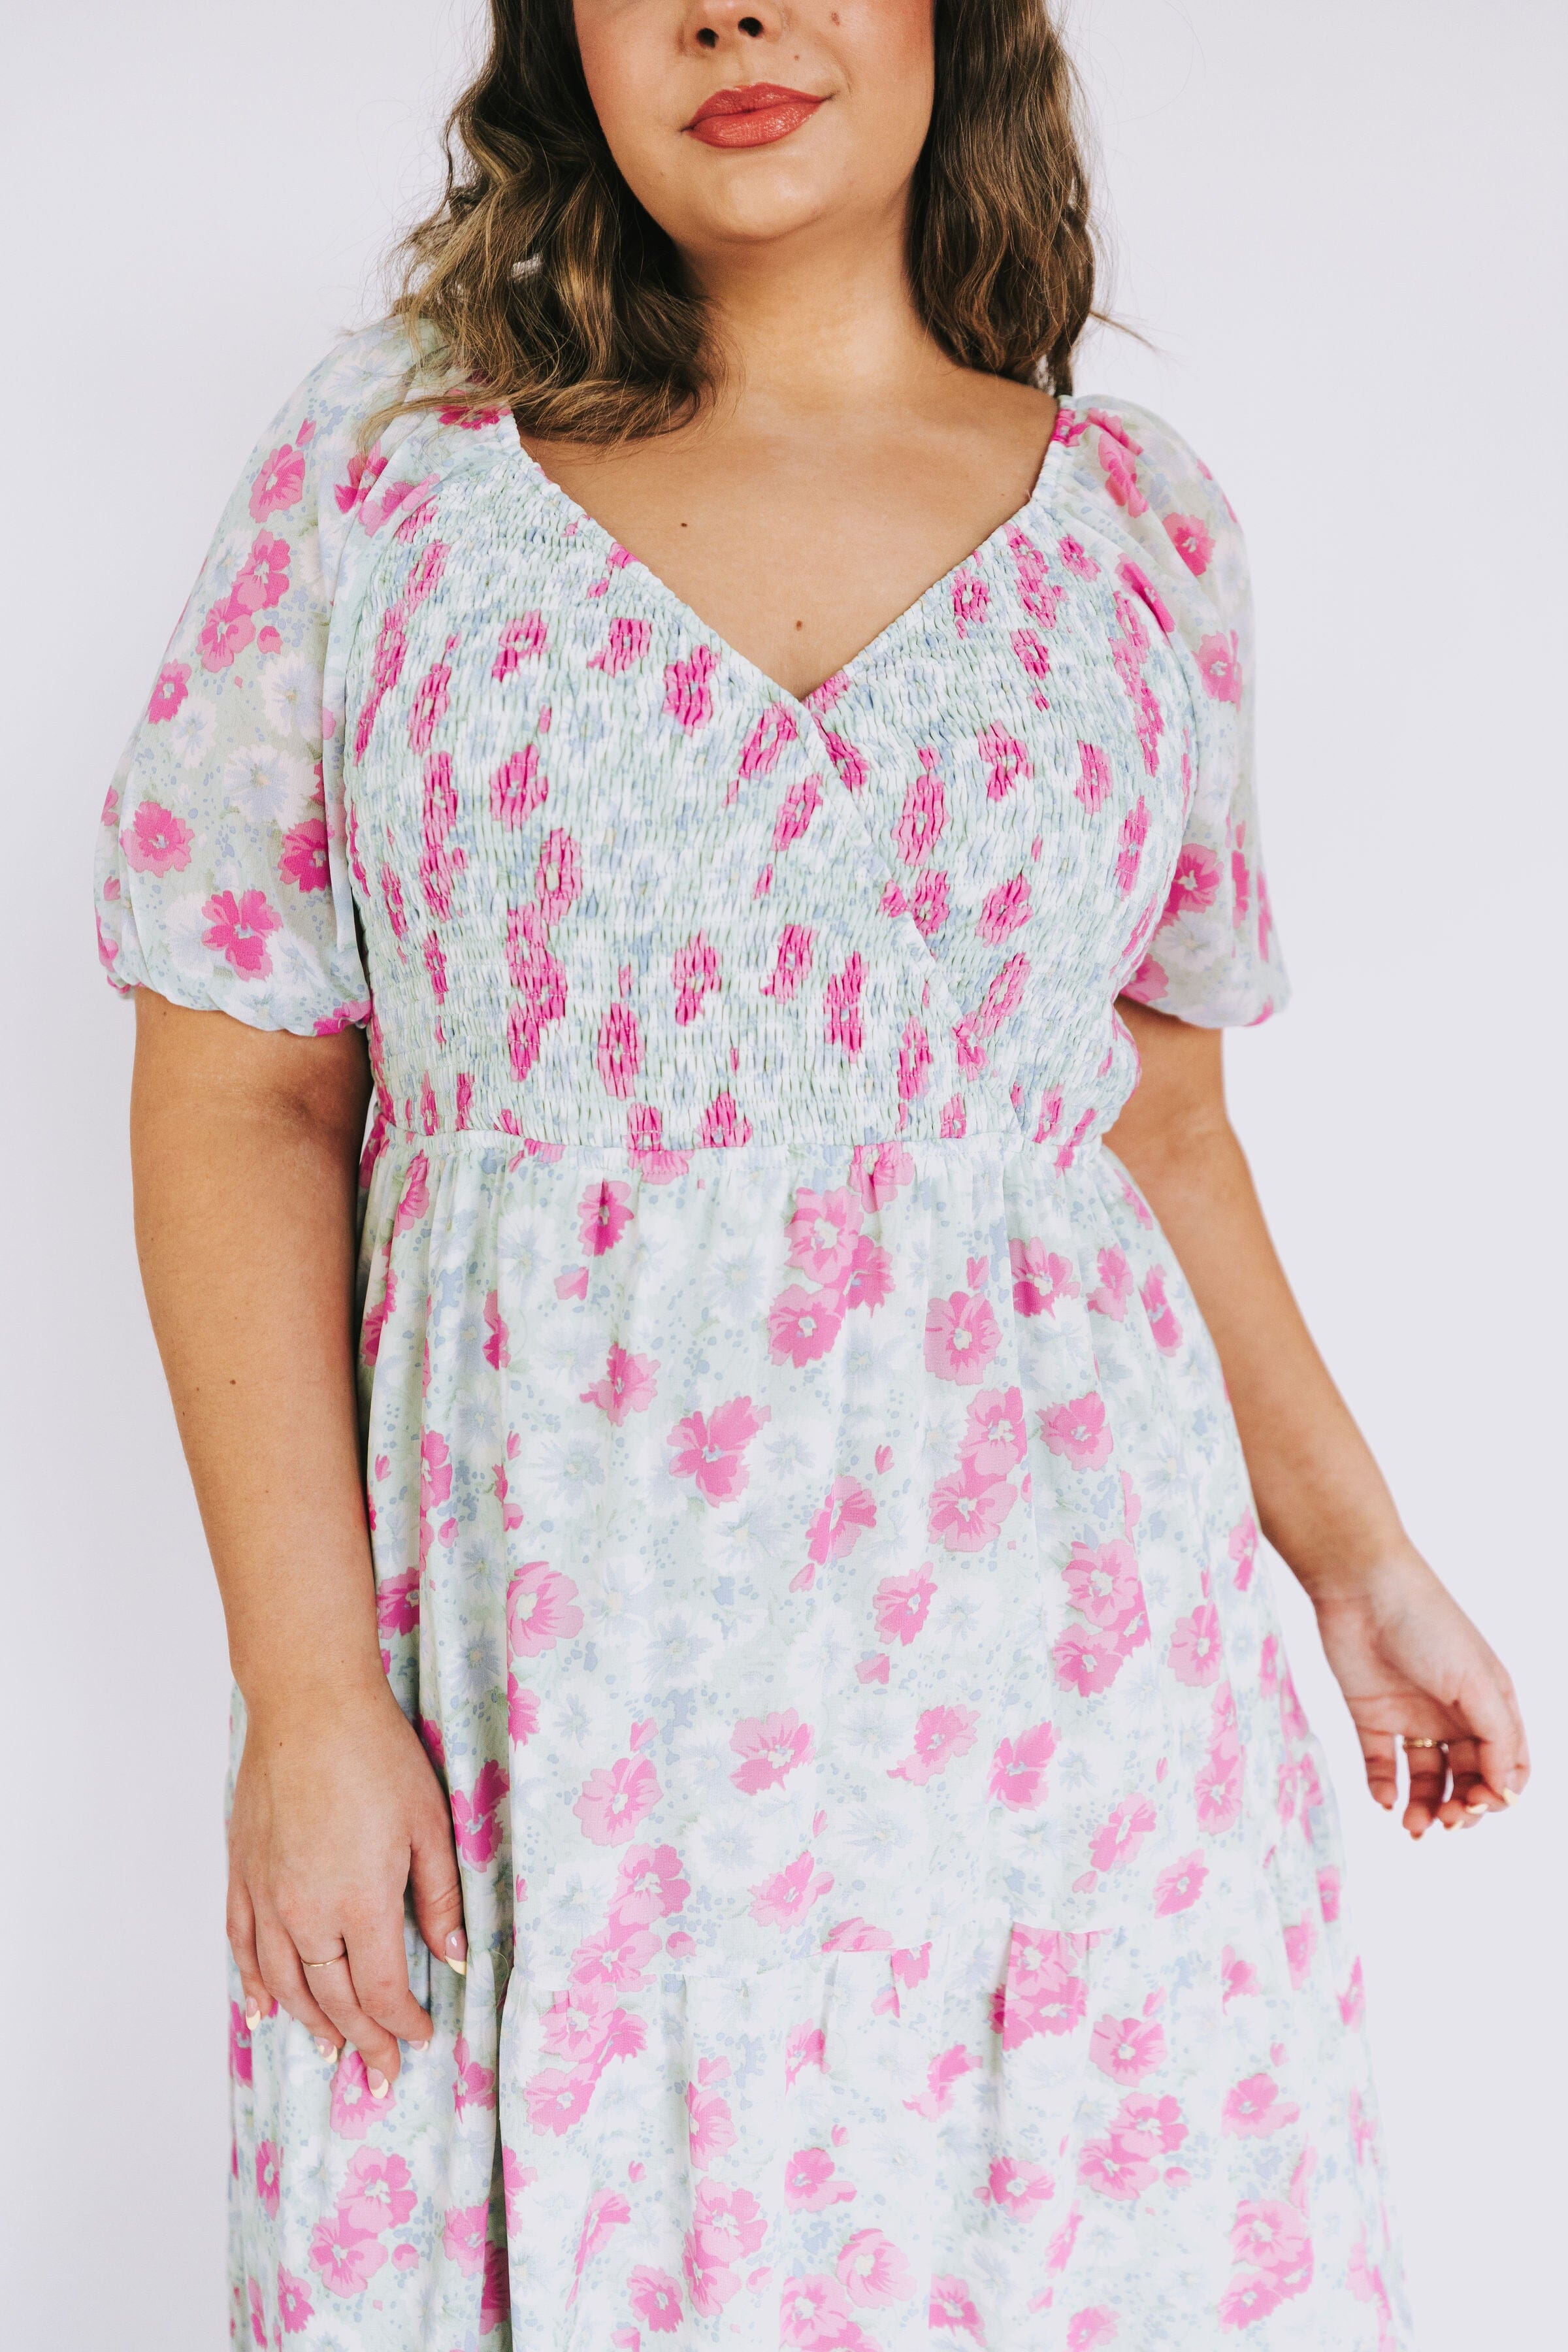 PLUS SIZE - Loved By You Dress